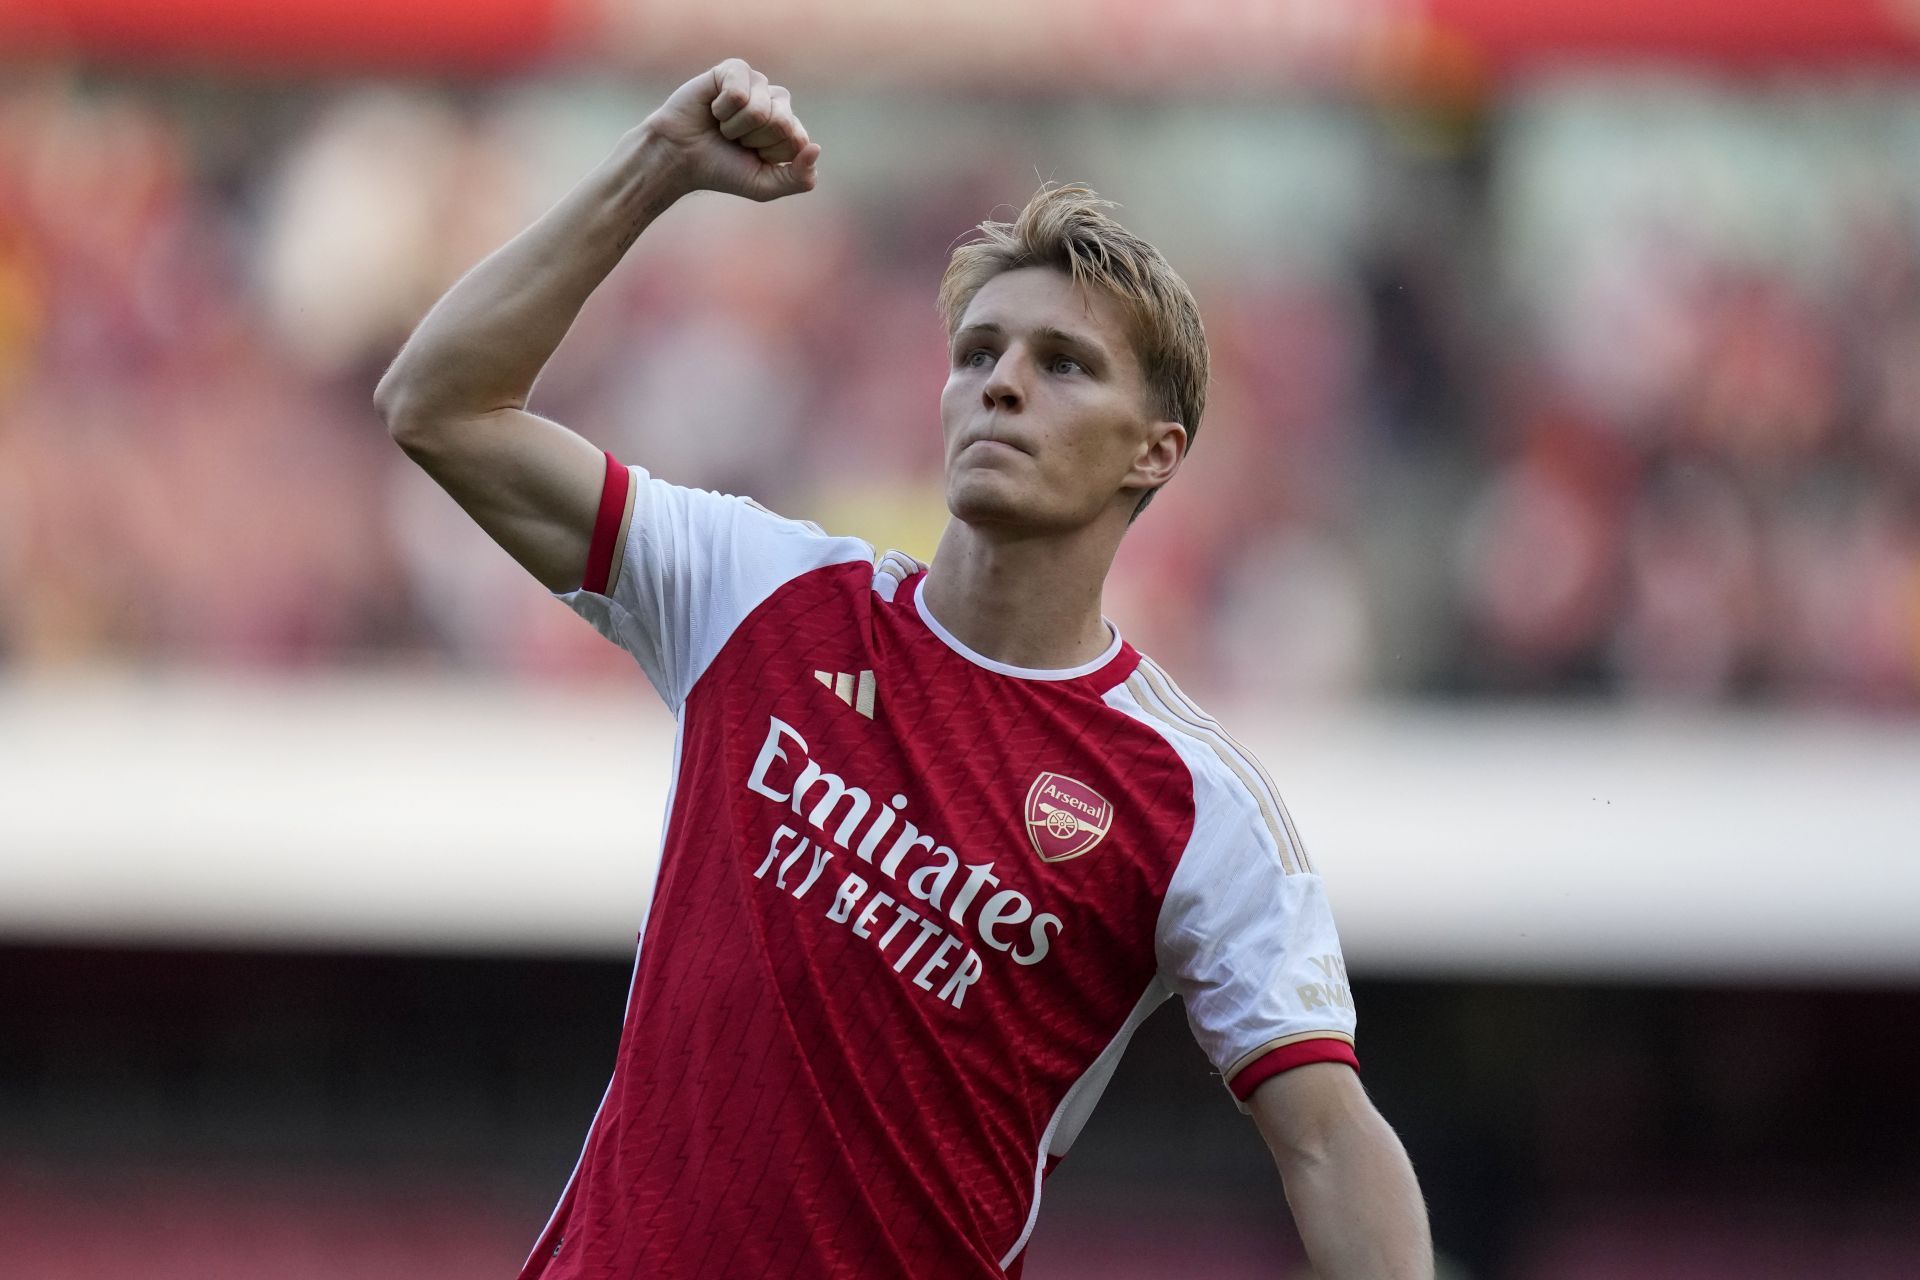 Martin Odegaard has been on the rise at the Emirates in recent seasons.